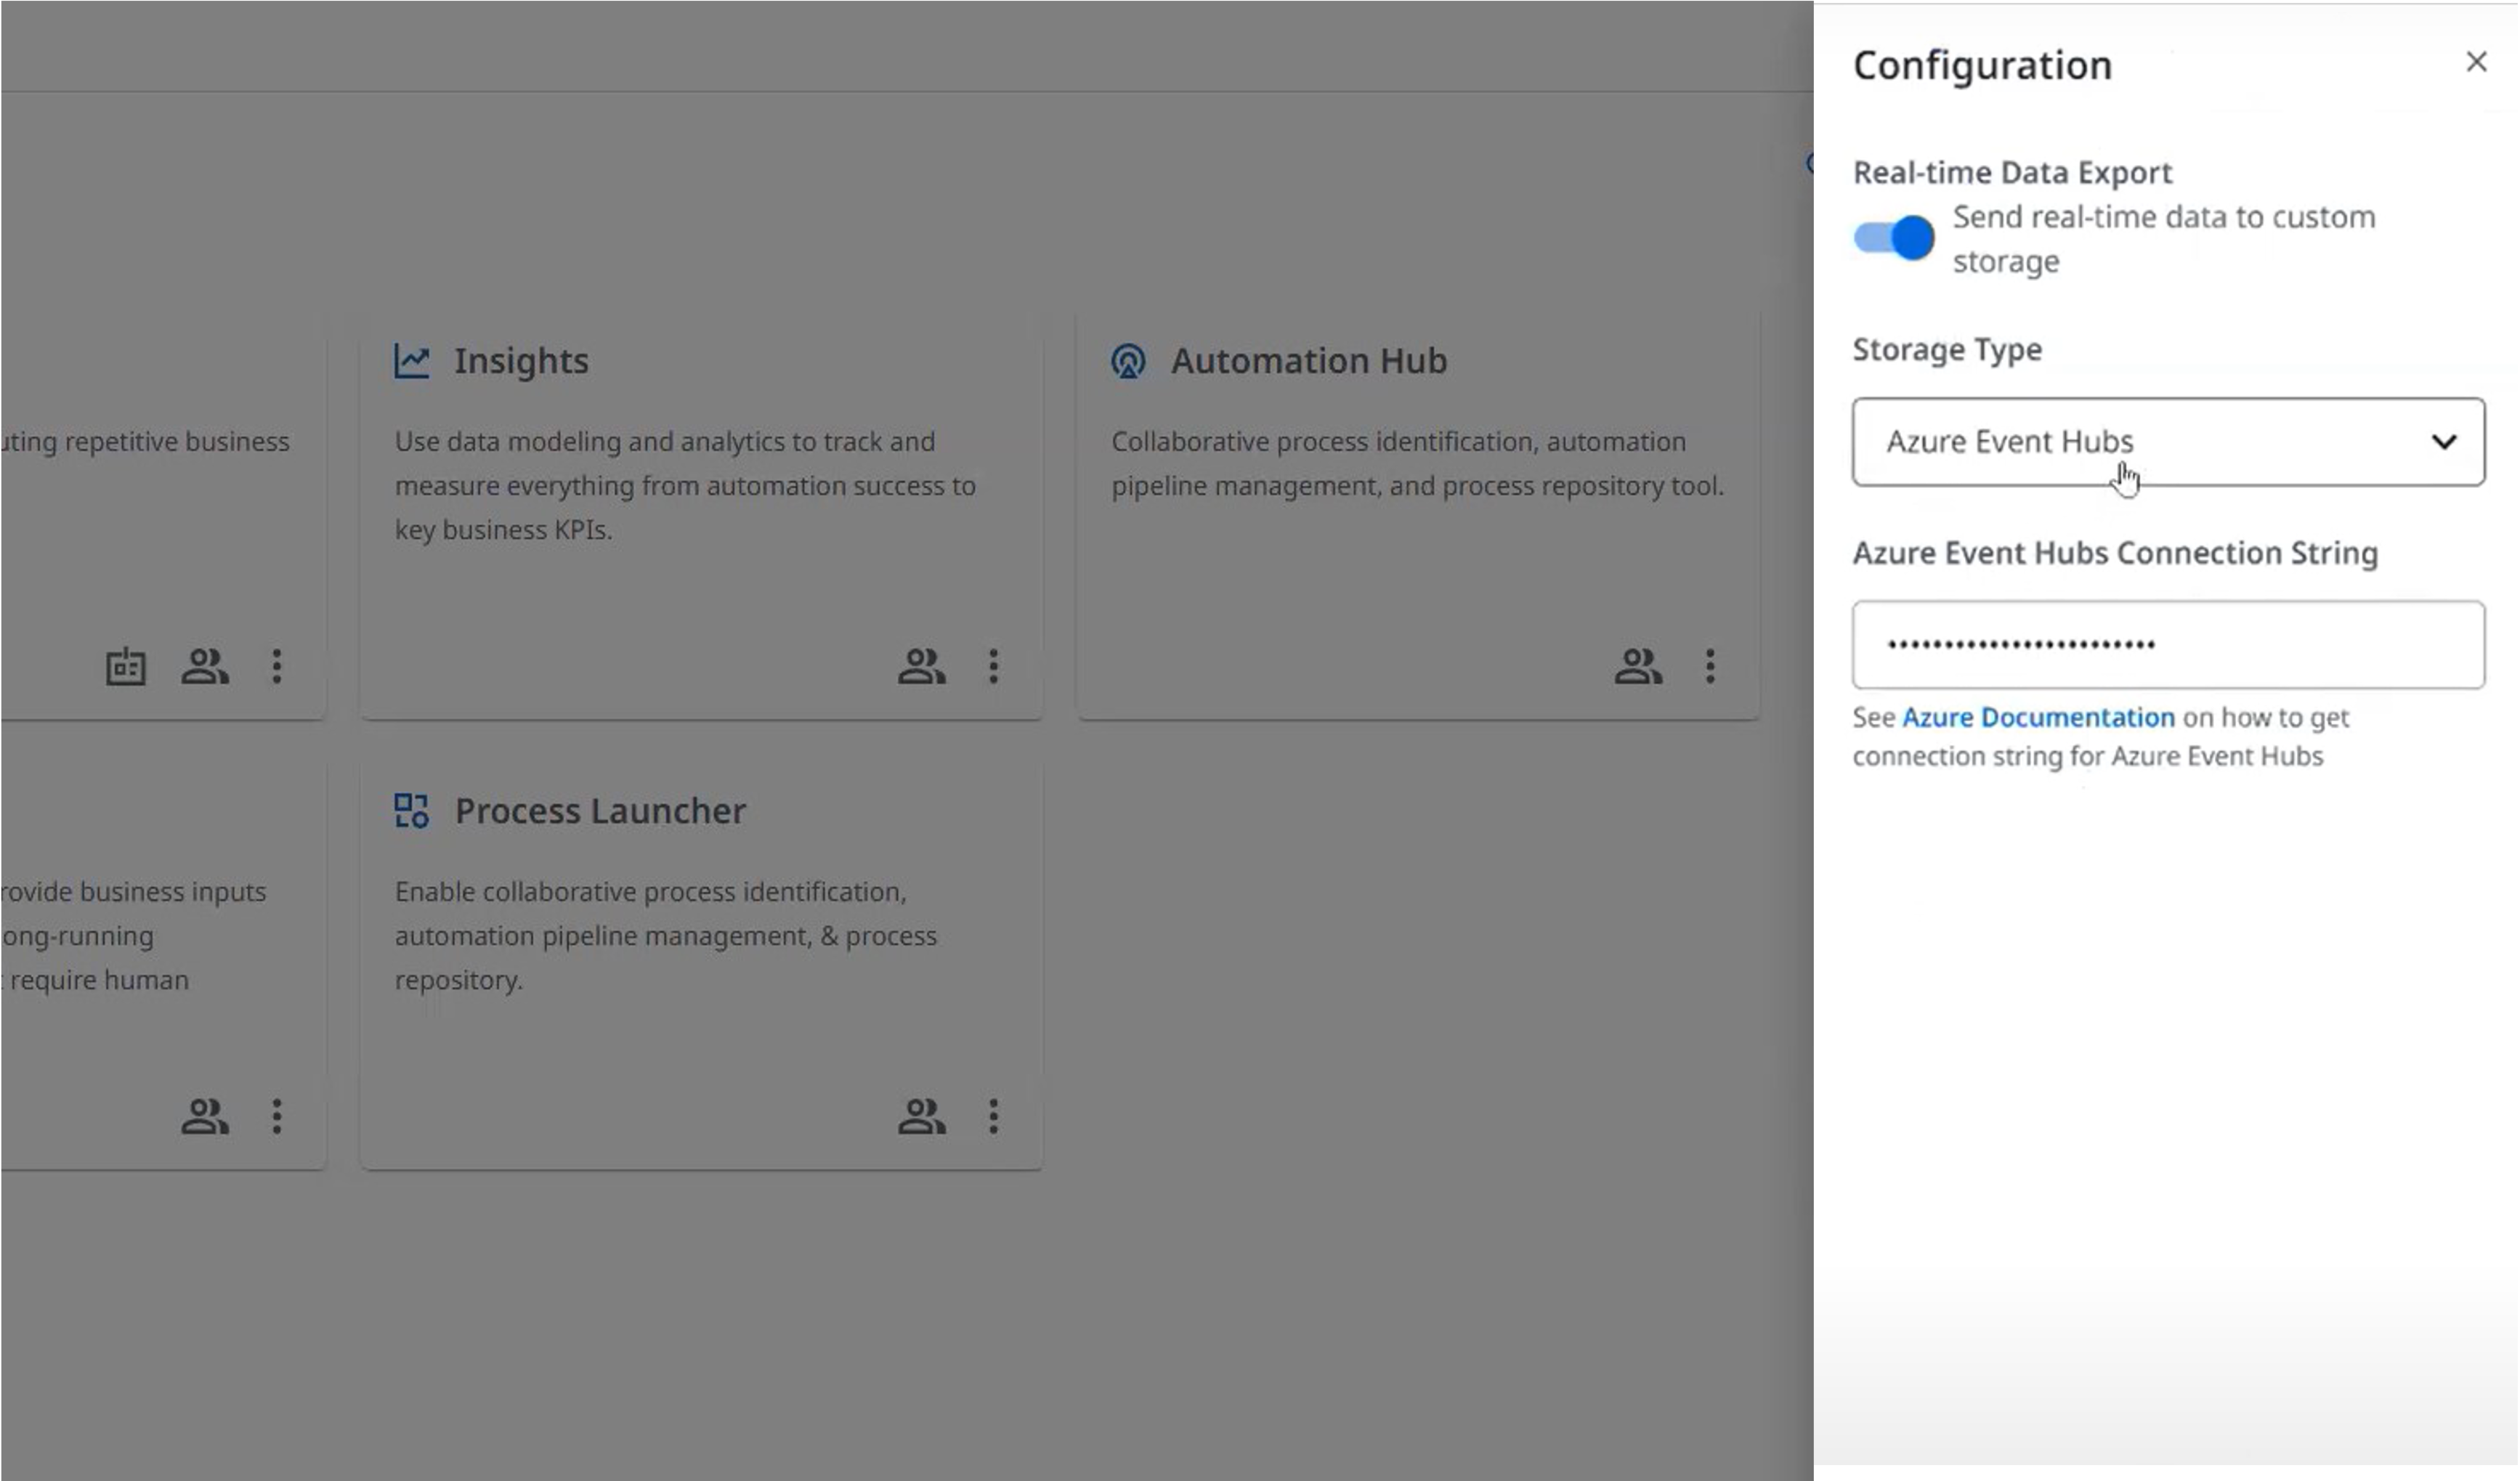 UiPath Insights configuration 2023.4 release